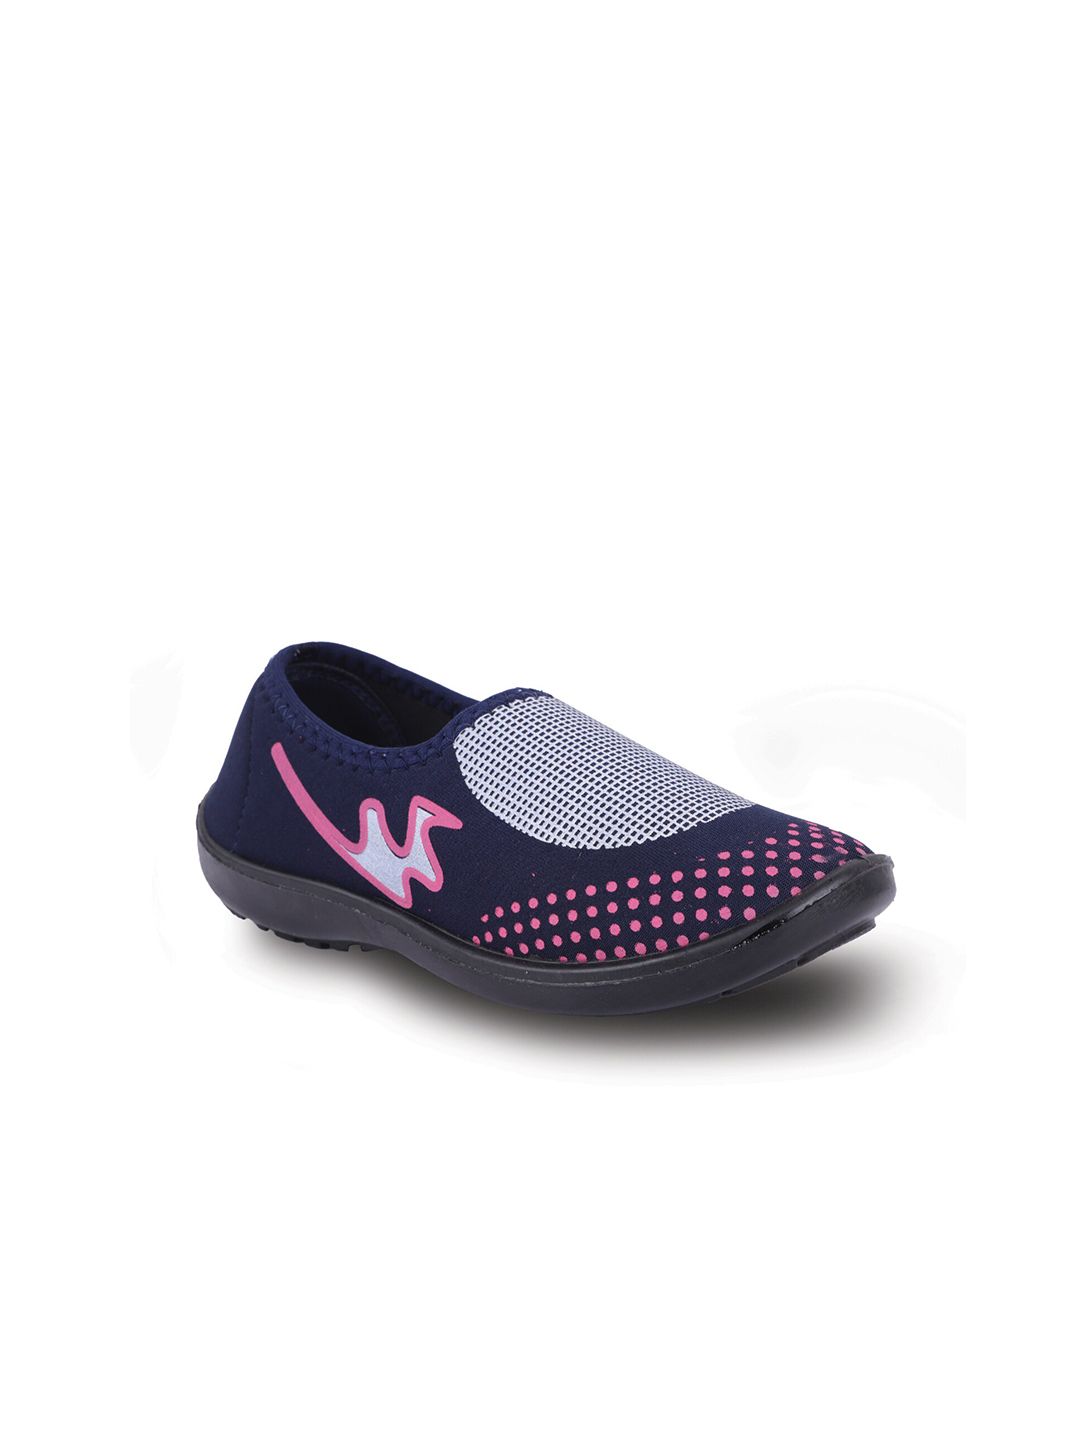 FABBMATE Women Blue Walking Non-Marking Shoes Price in India